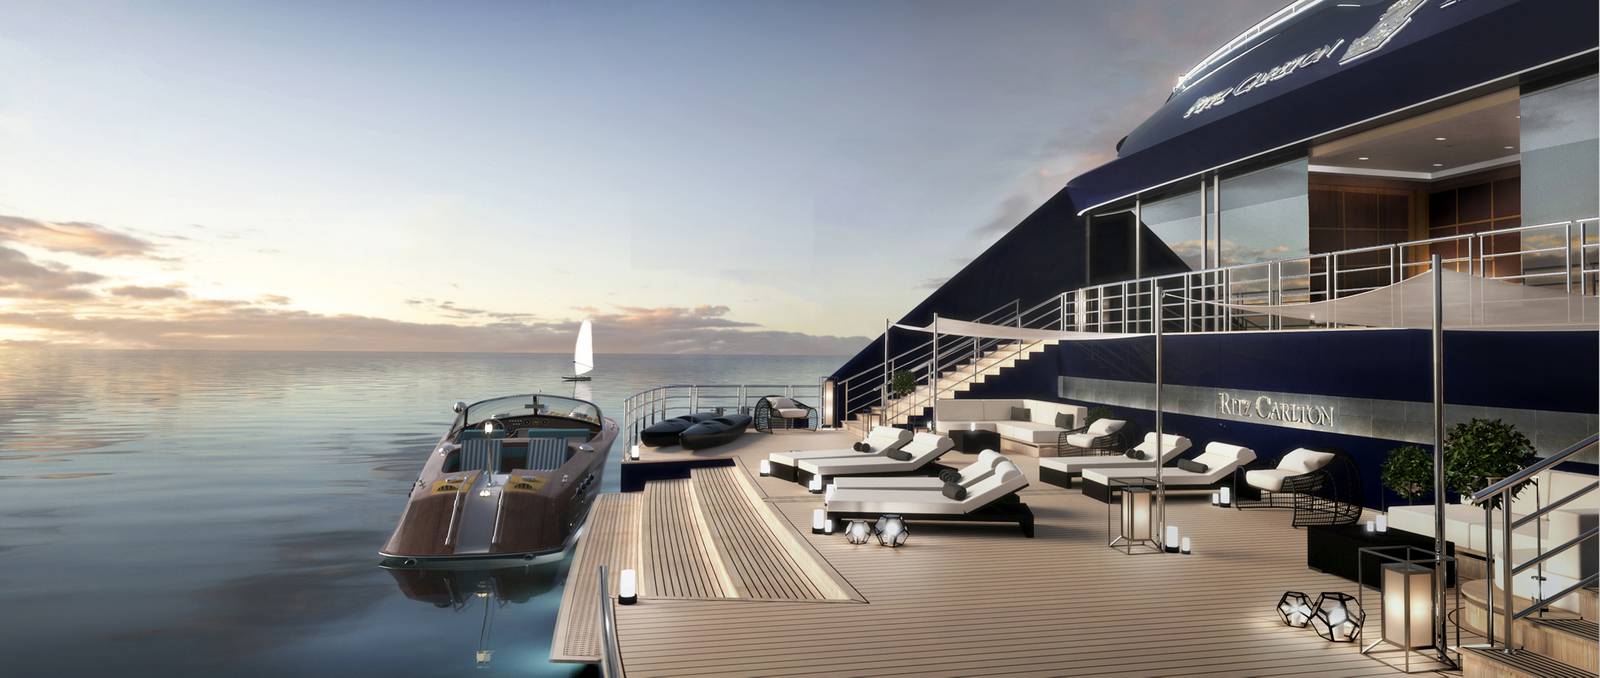 First ship of RitzCarlton Yacht Collection to make its debut on October 15